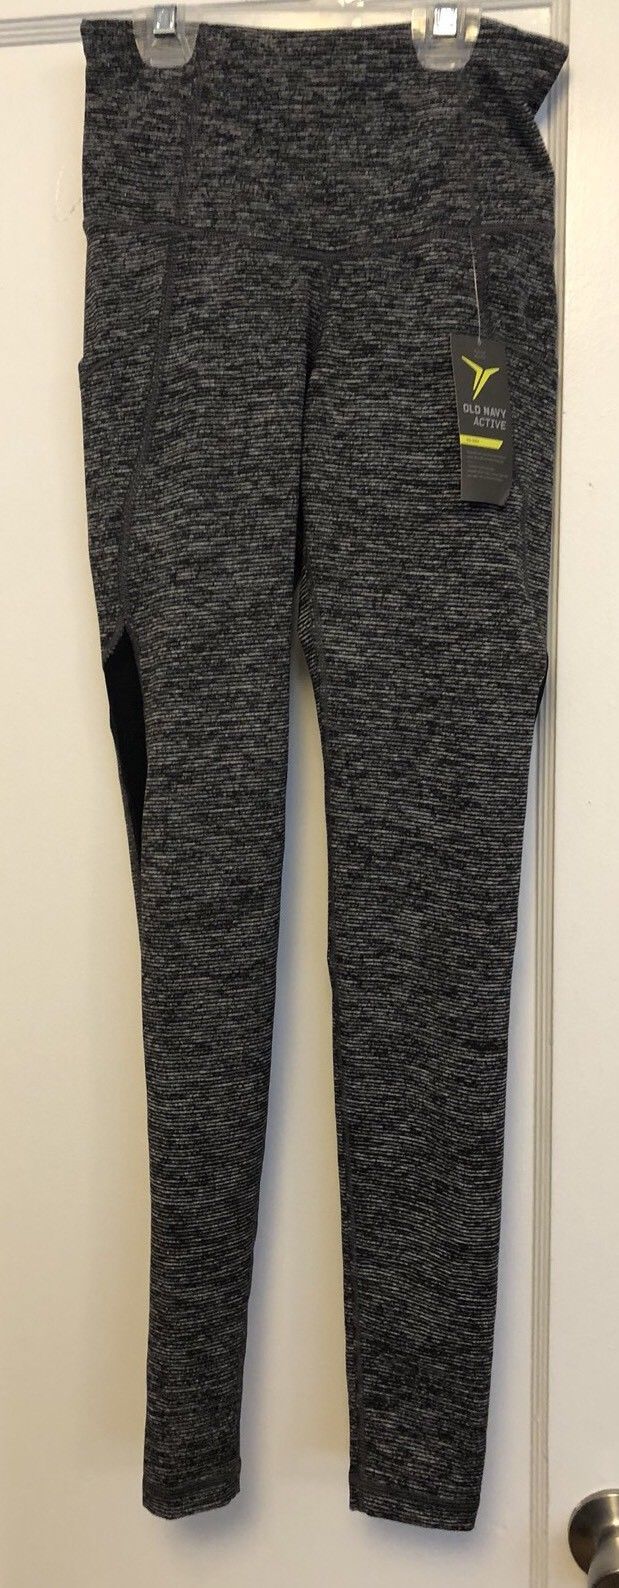 BNWT Old Navy Active Women’s Go DRY Compression Mid Rise Leggings XS  Black STRI - $22.76